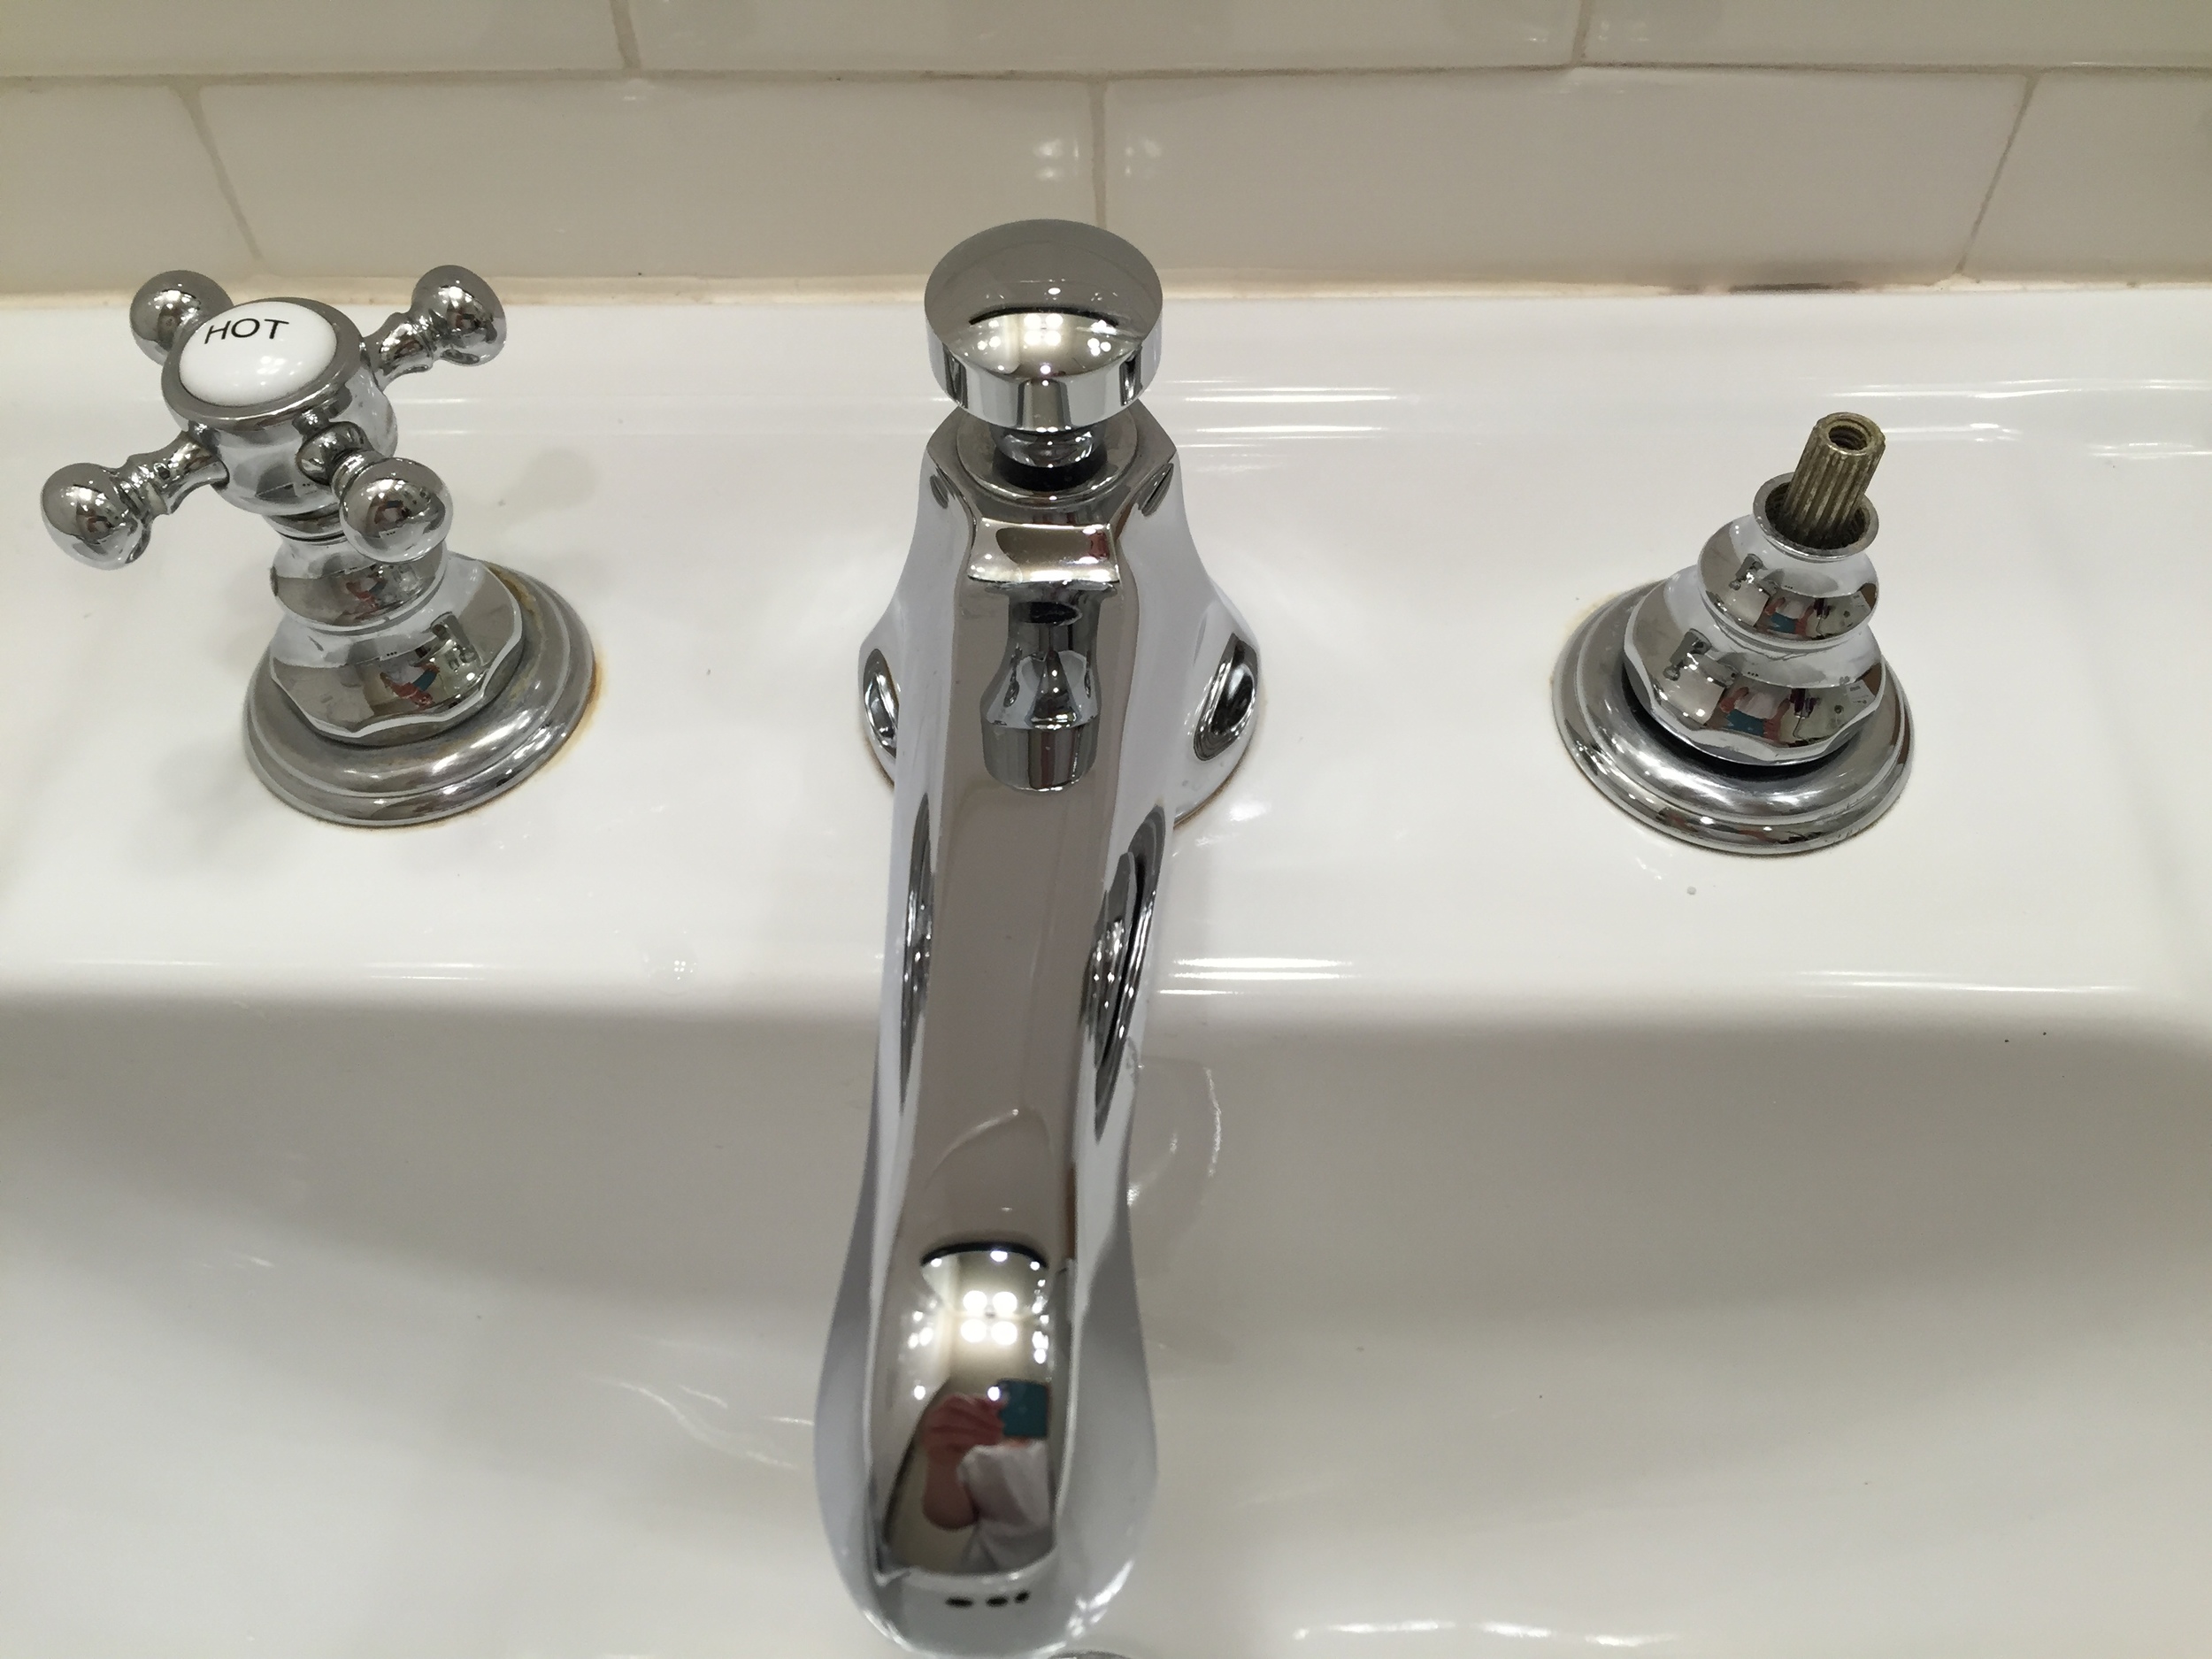  Faucet handle removed using an Allen wrrench to loosen two set screws... 